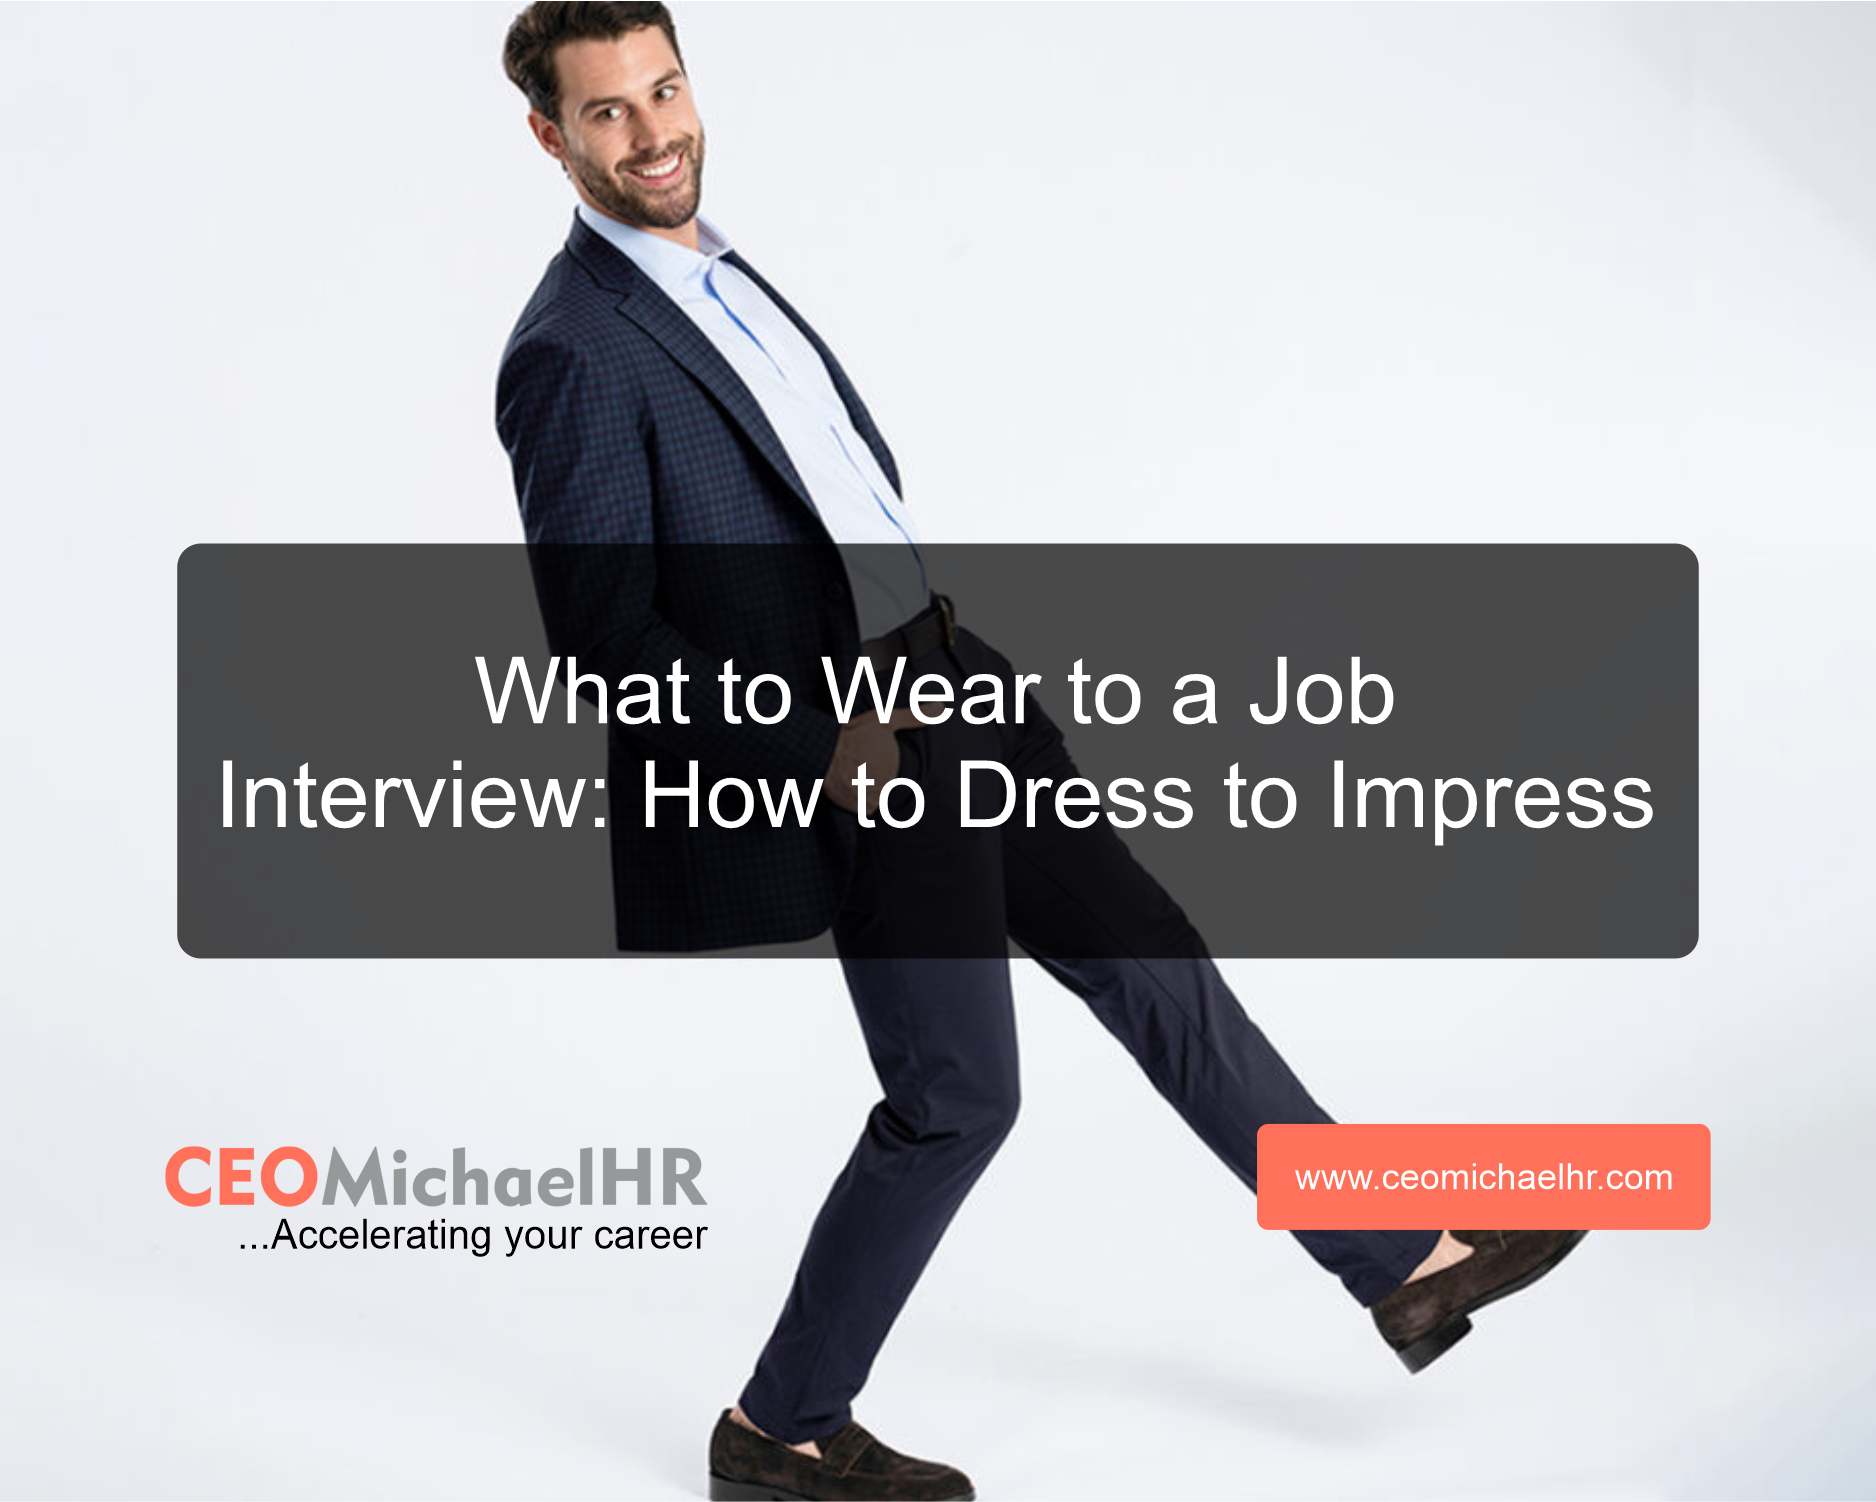 What to Wear to a Job Interview: How to Dress to Impress